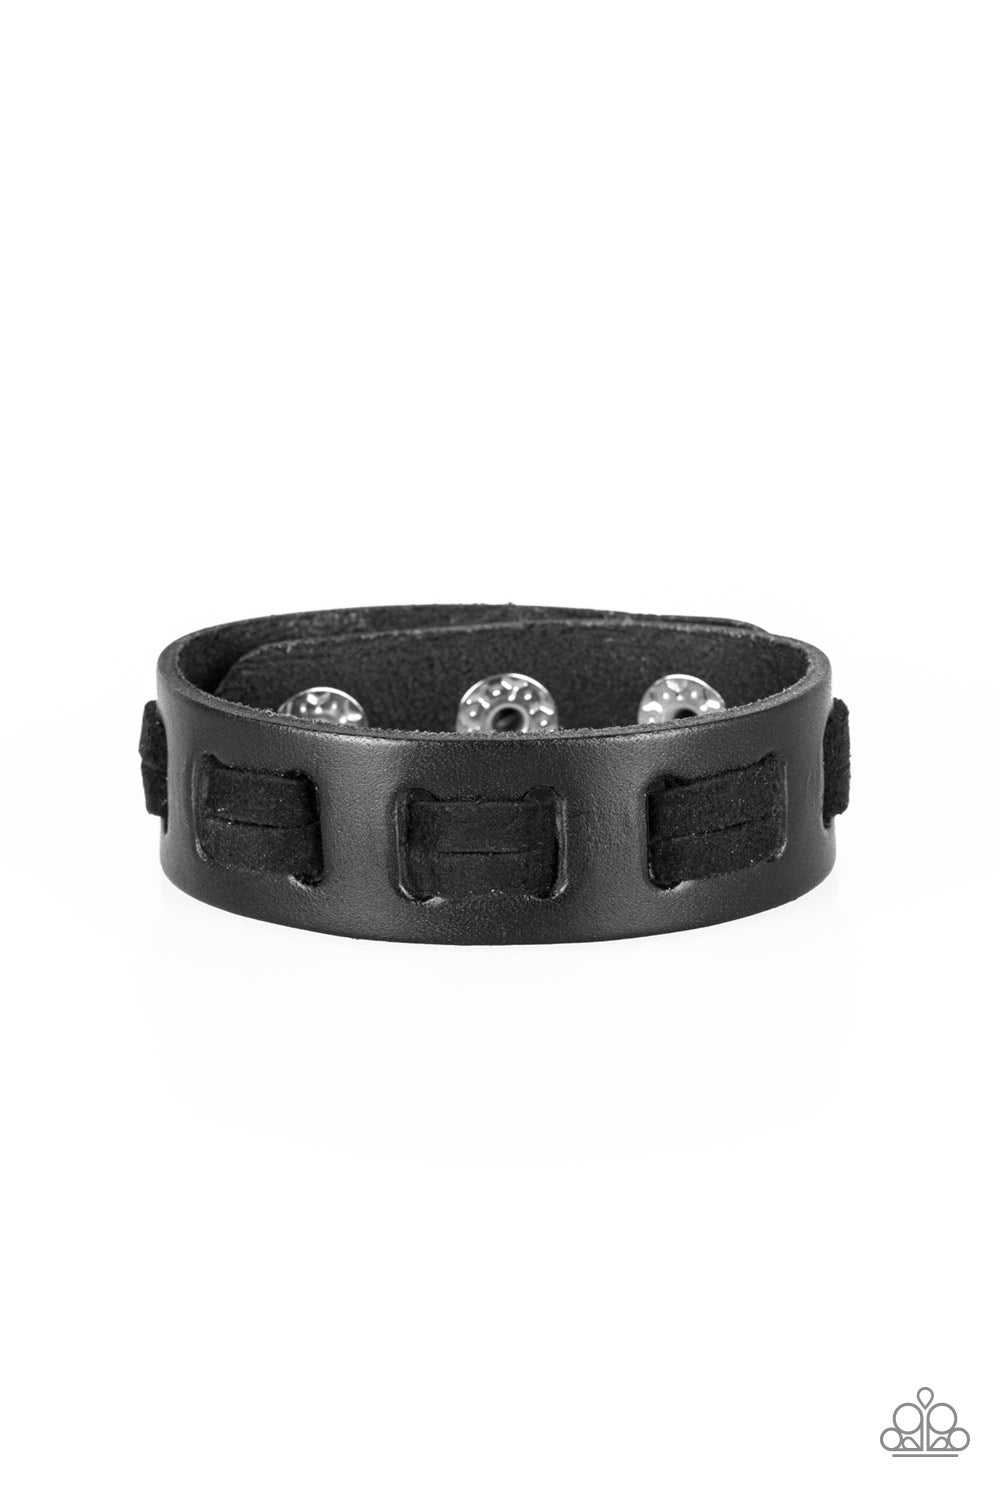 Bring Out the WEST In You Black-Urban Bracelet